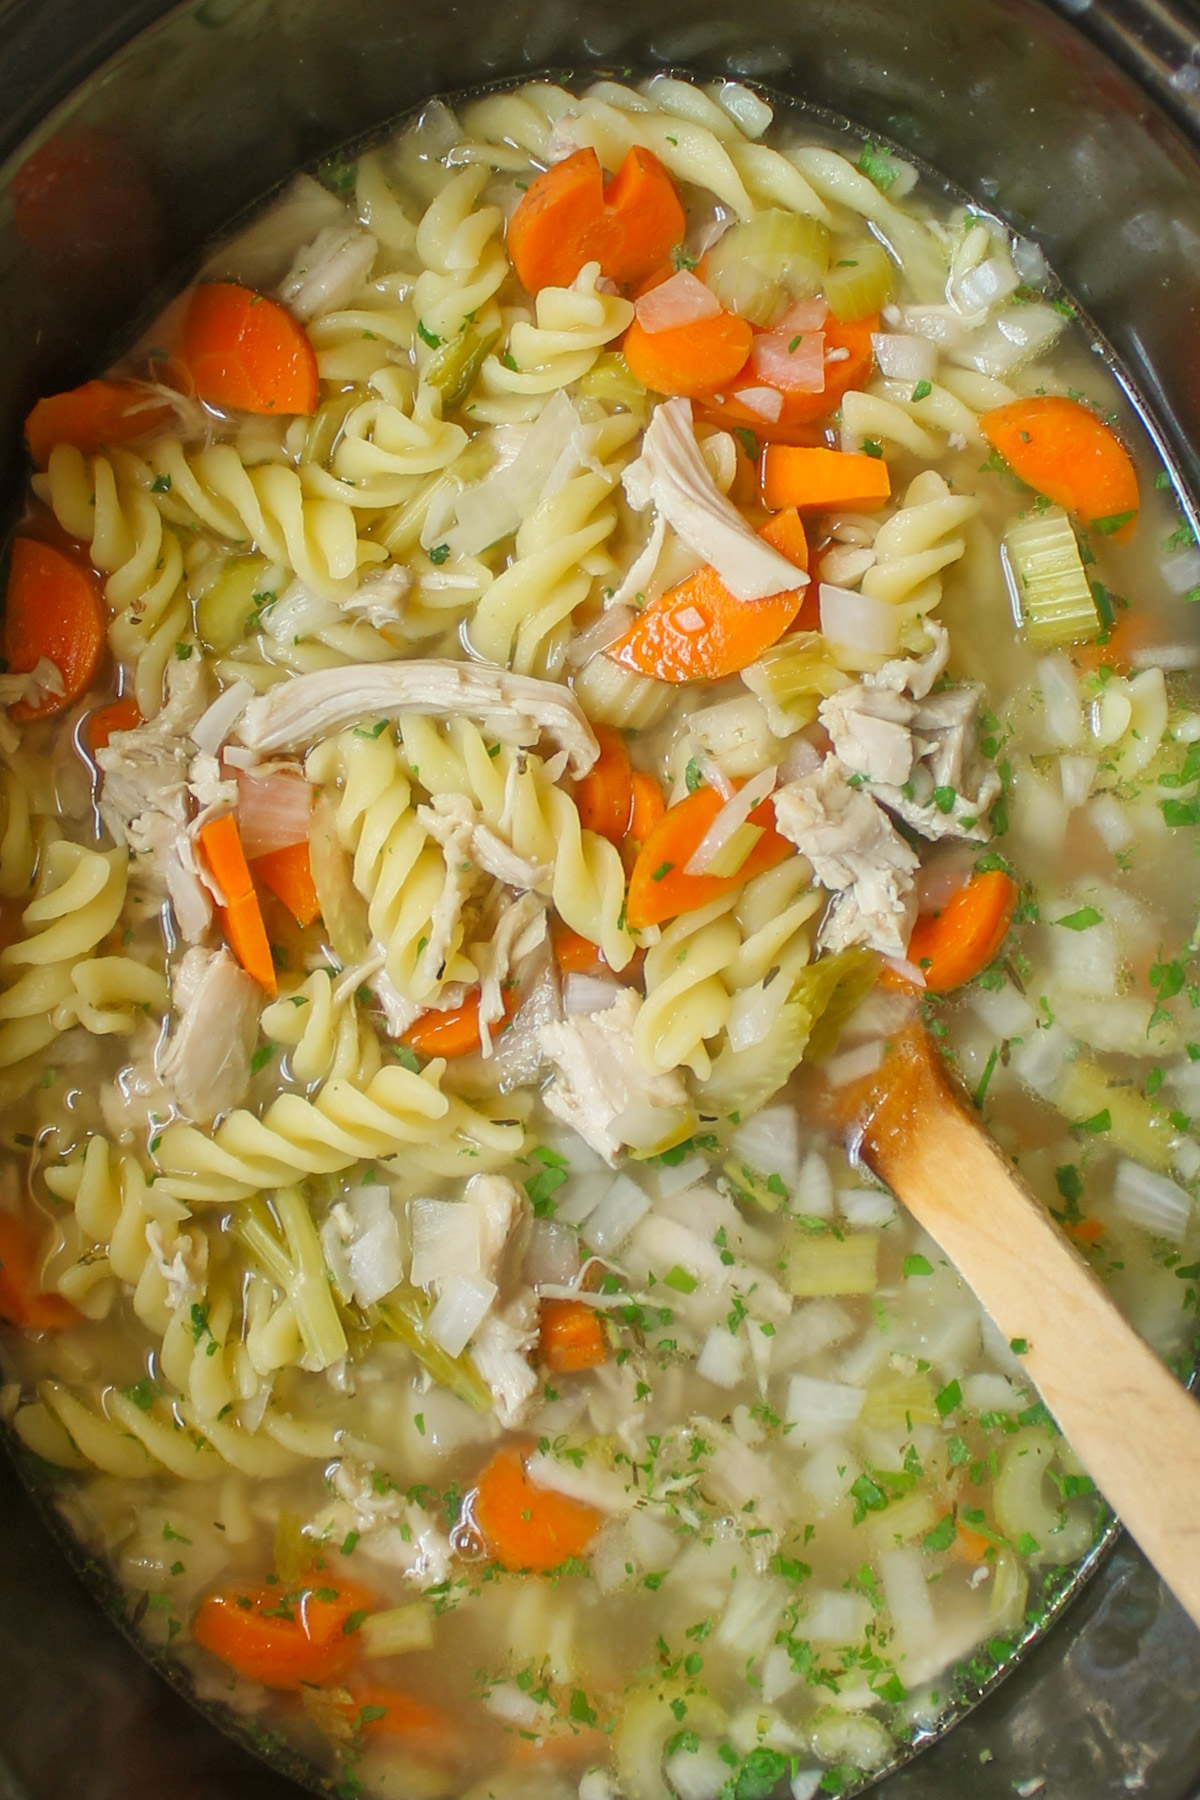 A crockpot full of chicken noodle soup with a wooden spoon.